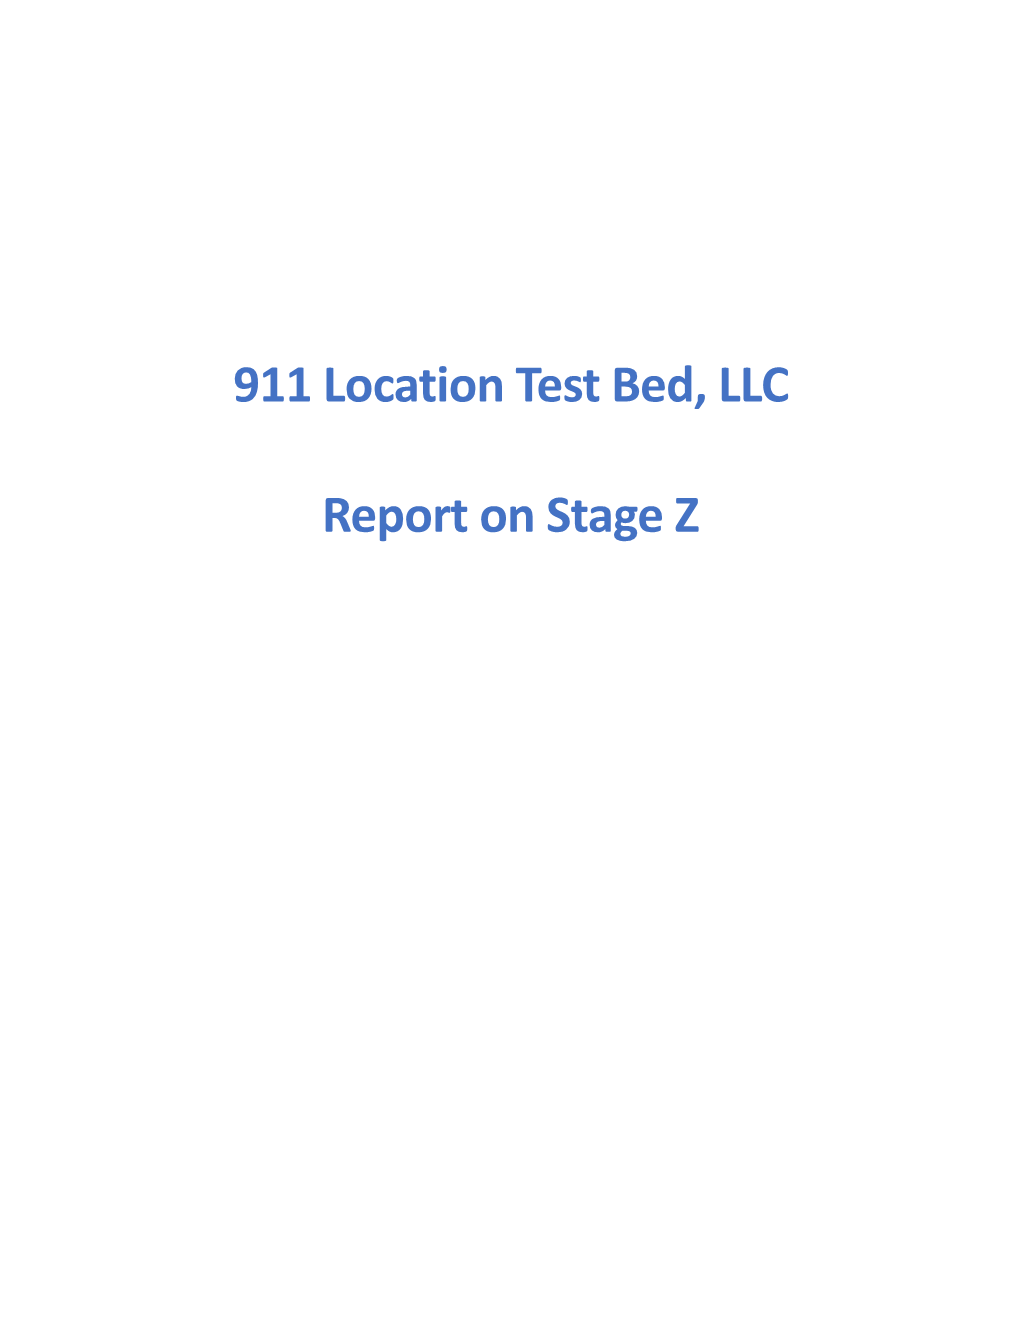 911 Location Test Bed, LLC Report on Stage Z